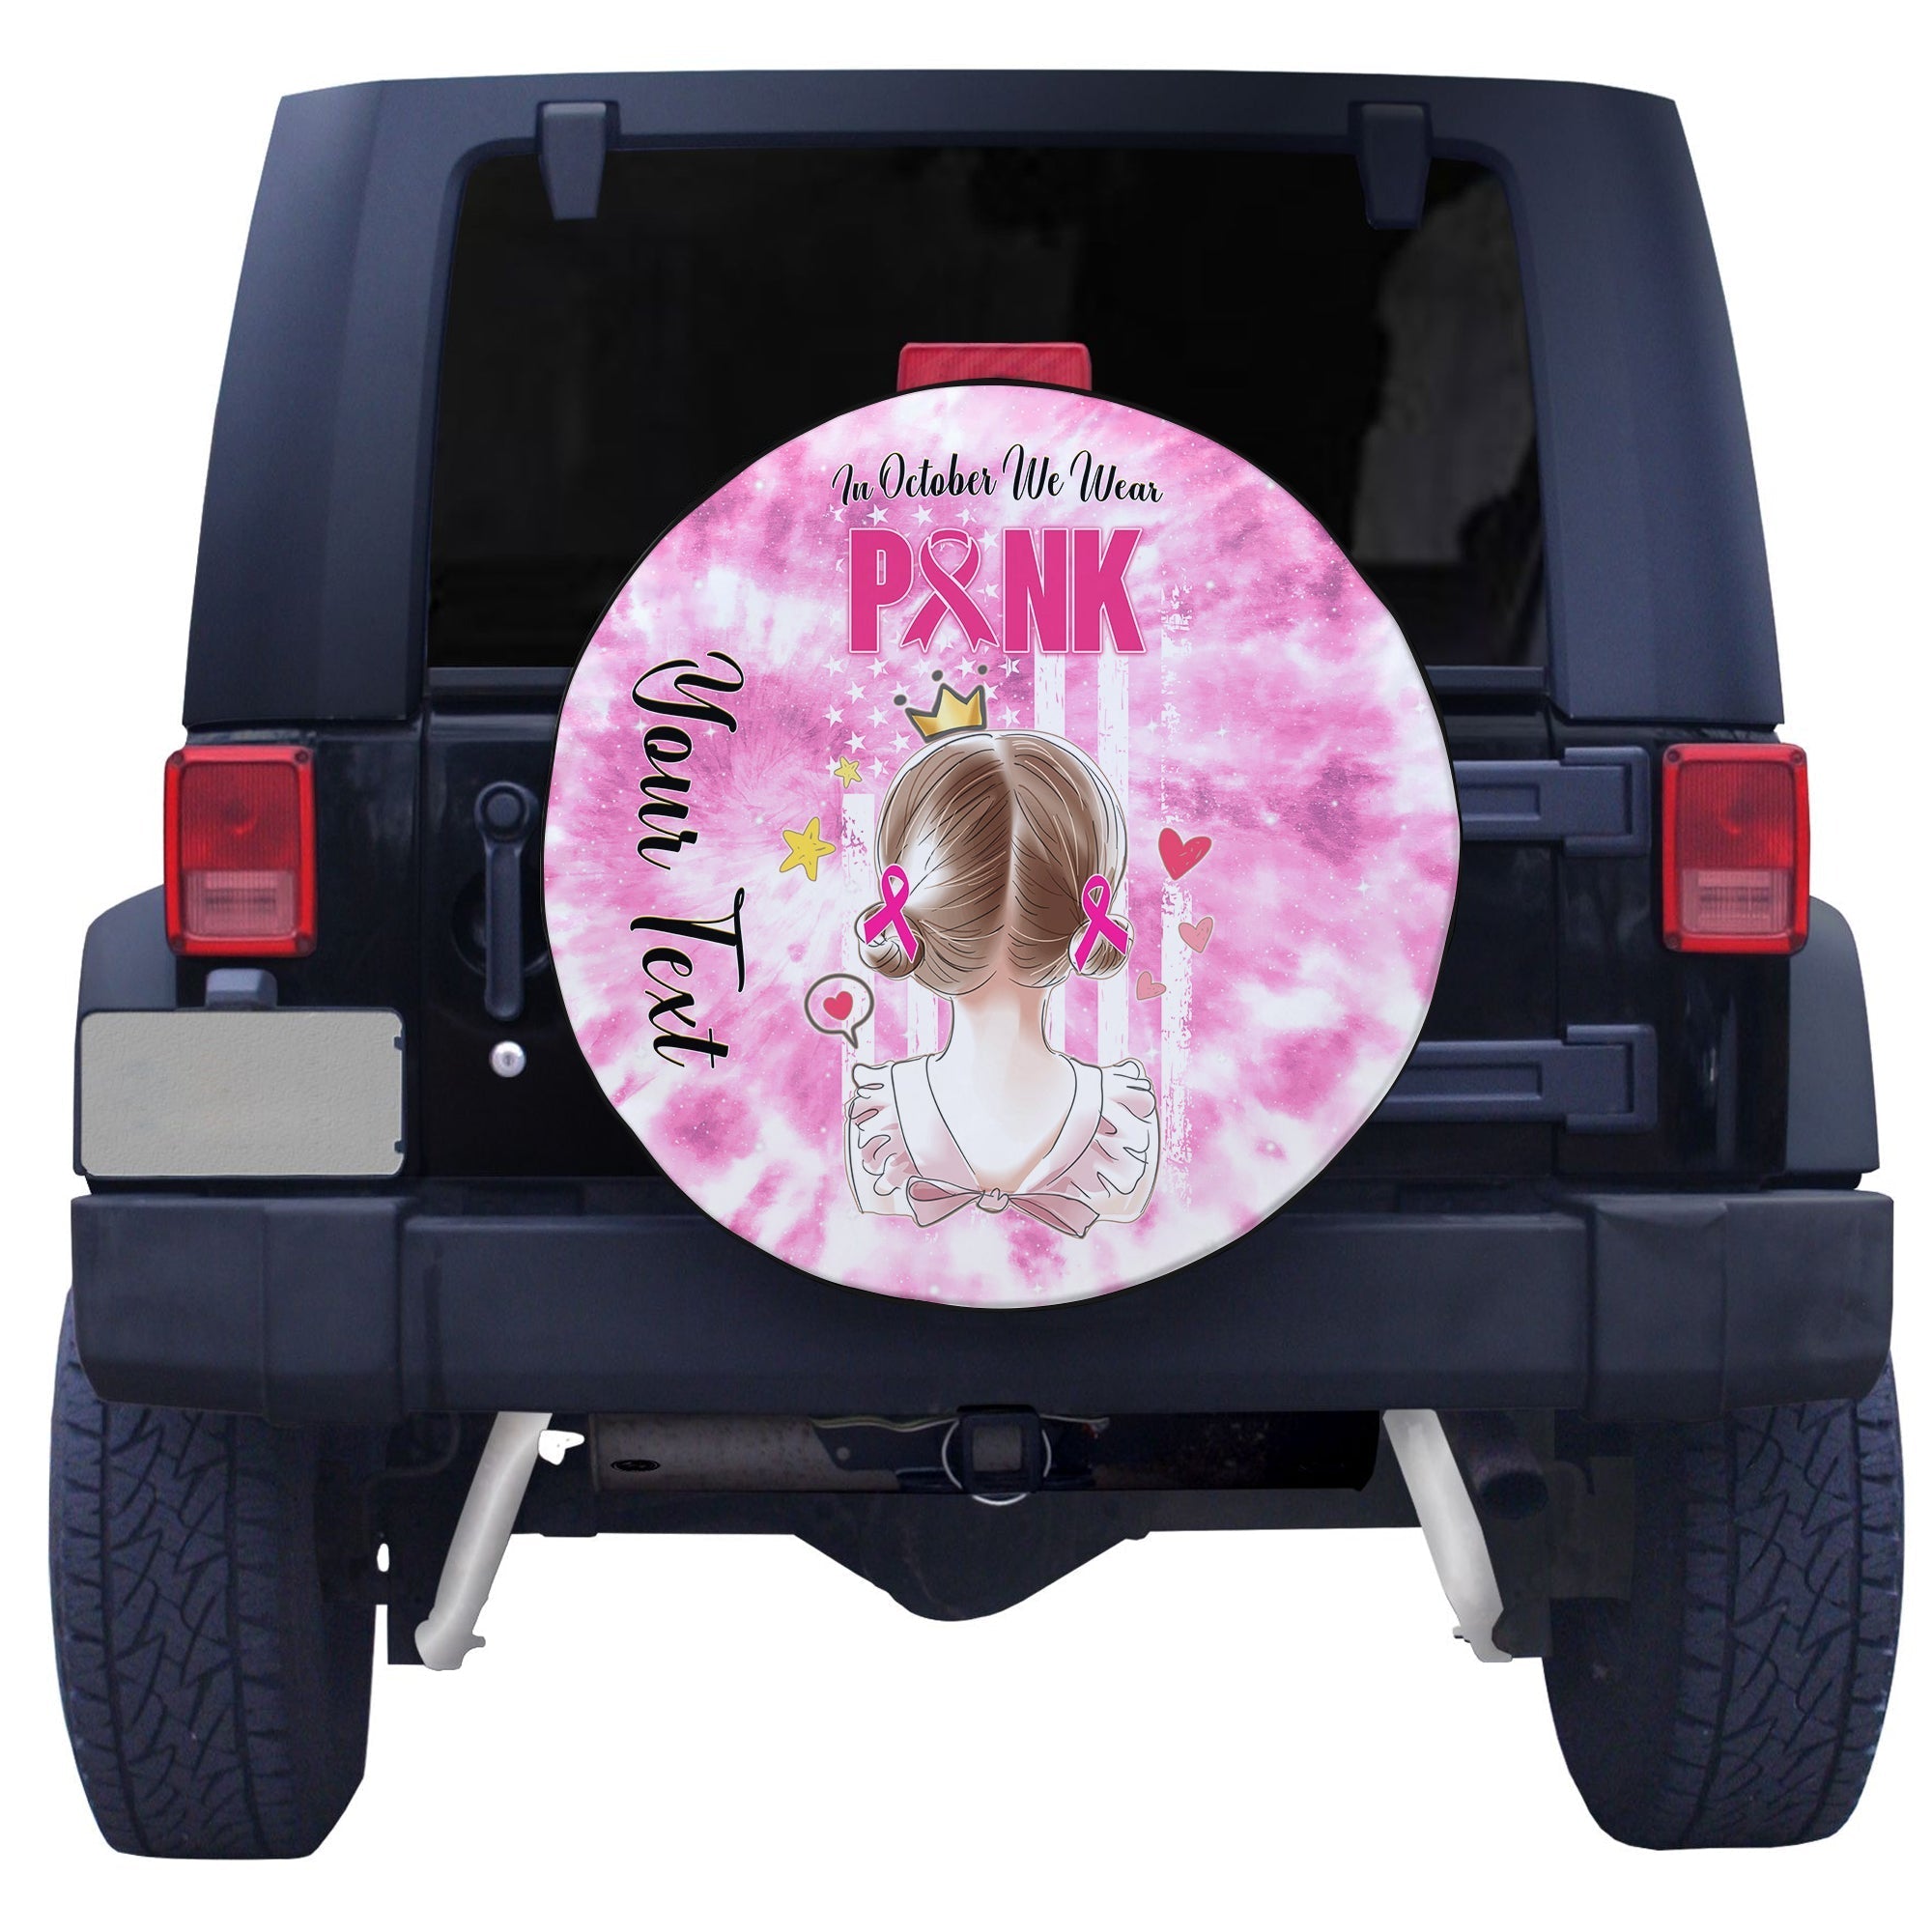 custom-personalised-breast-cancer-spare-tire-cover-tie-dye-in-october-we-wear-pink-cute-girl